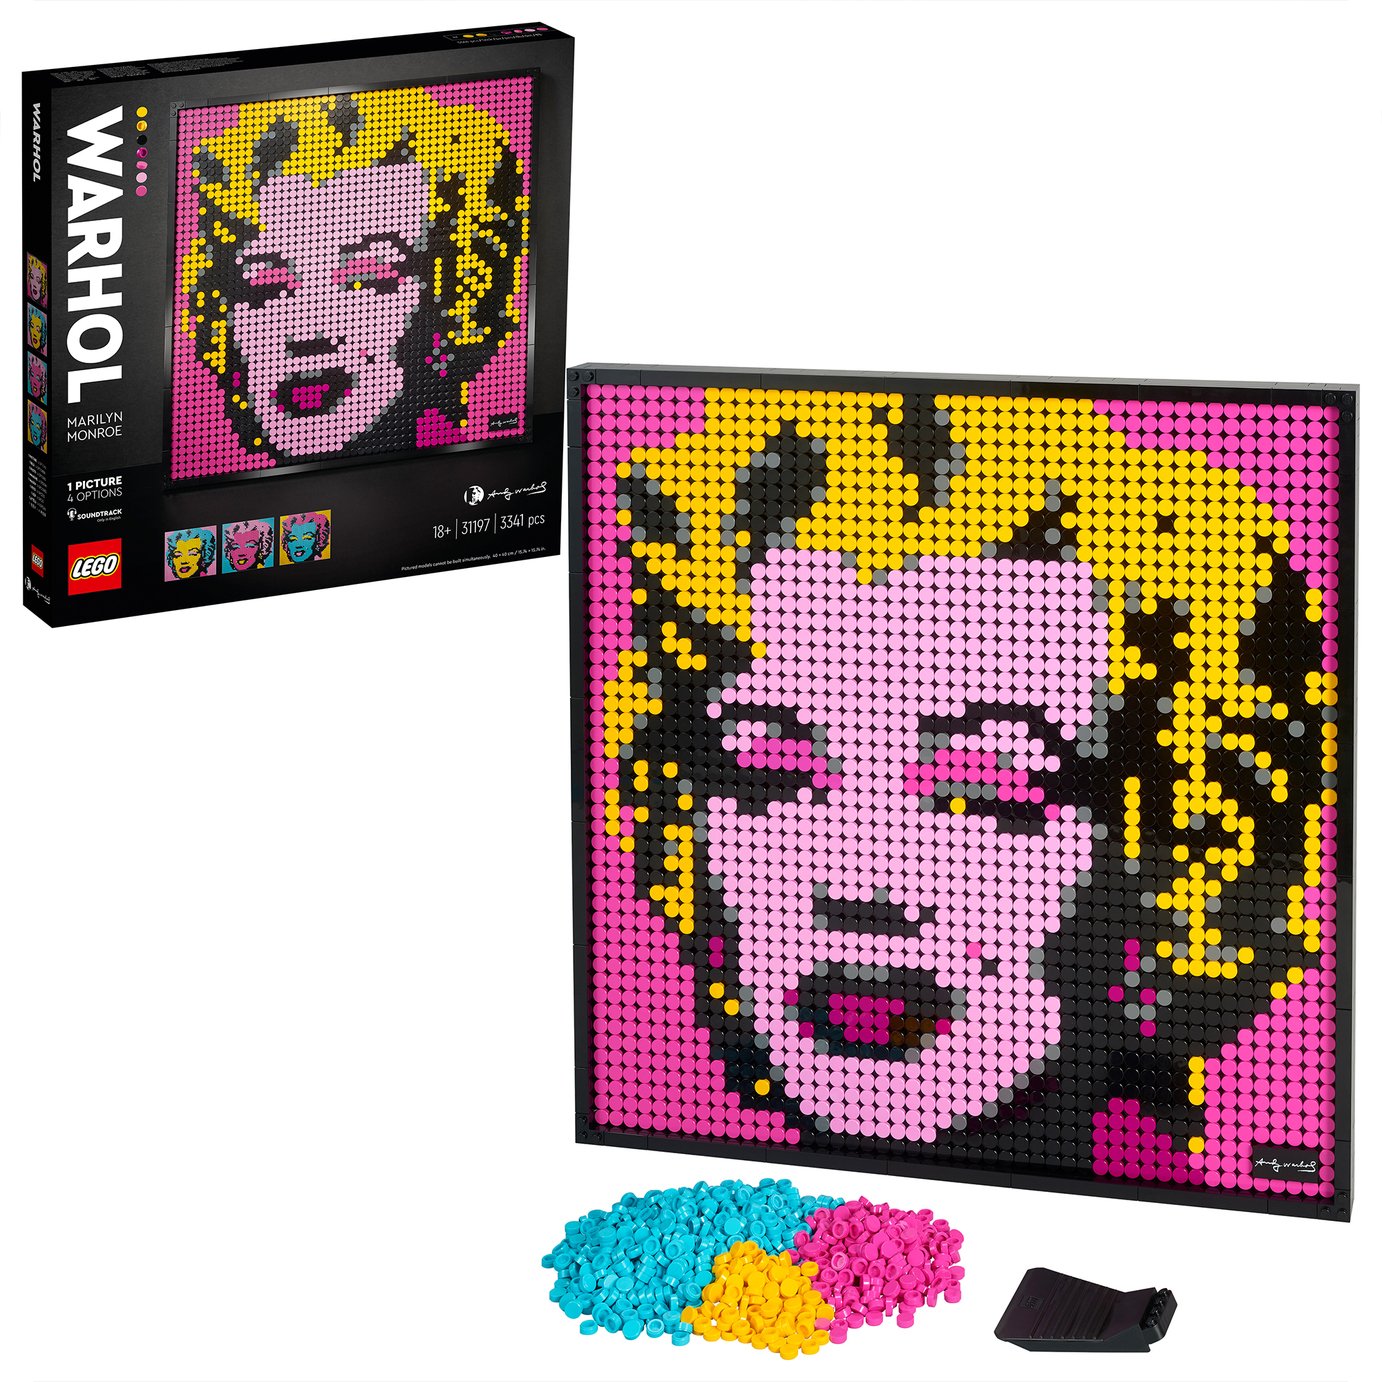 LEGO Art Andy Warhol's Marilyn Monroe Set for Adults 31197 Review